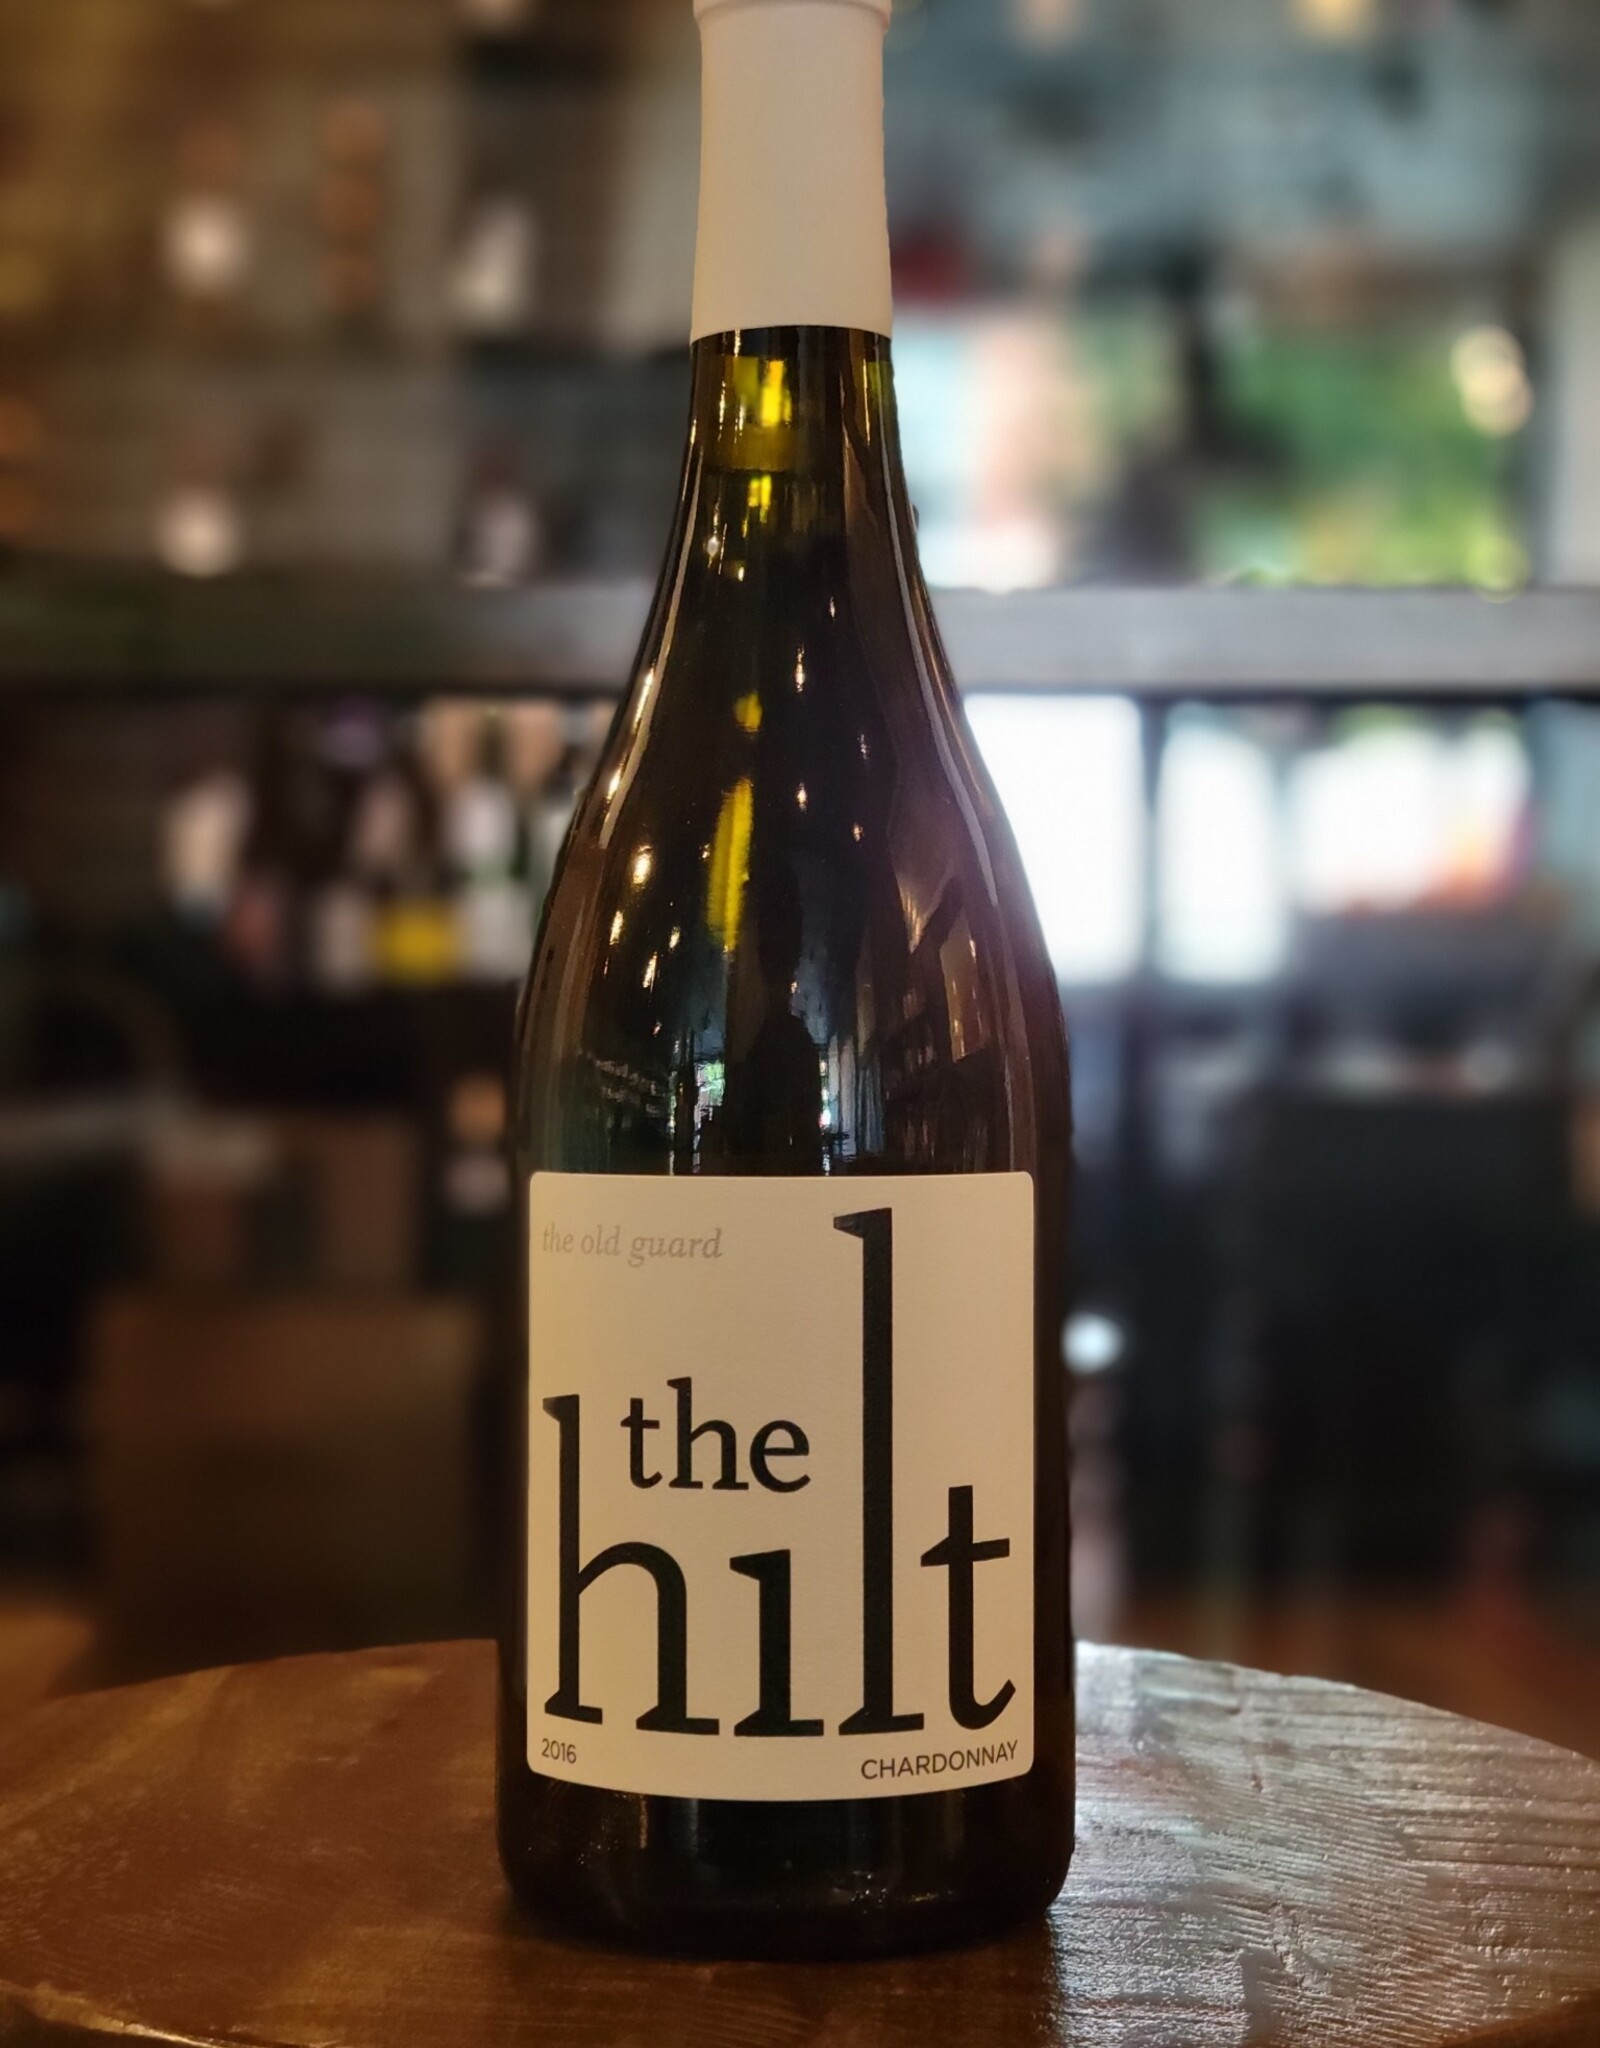 The Hilt 'The Old Guard' Chardonnay